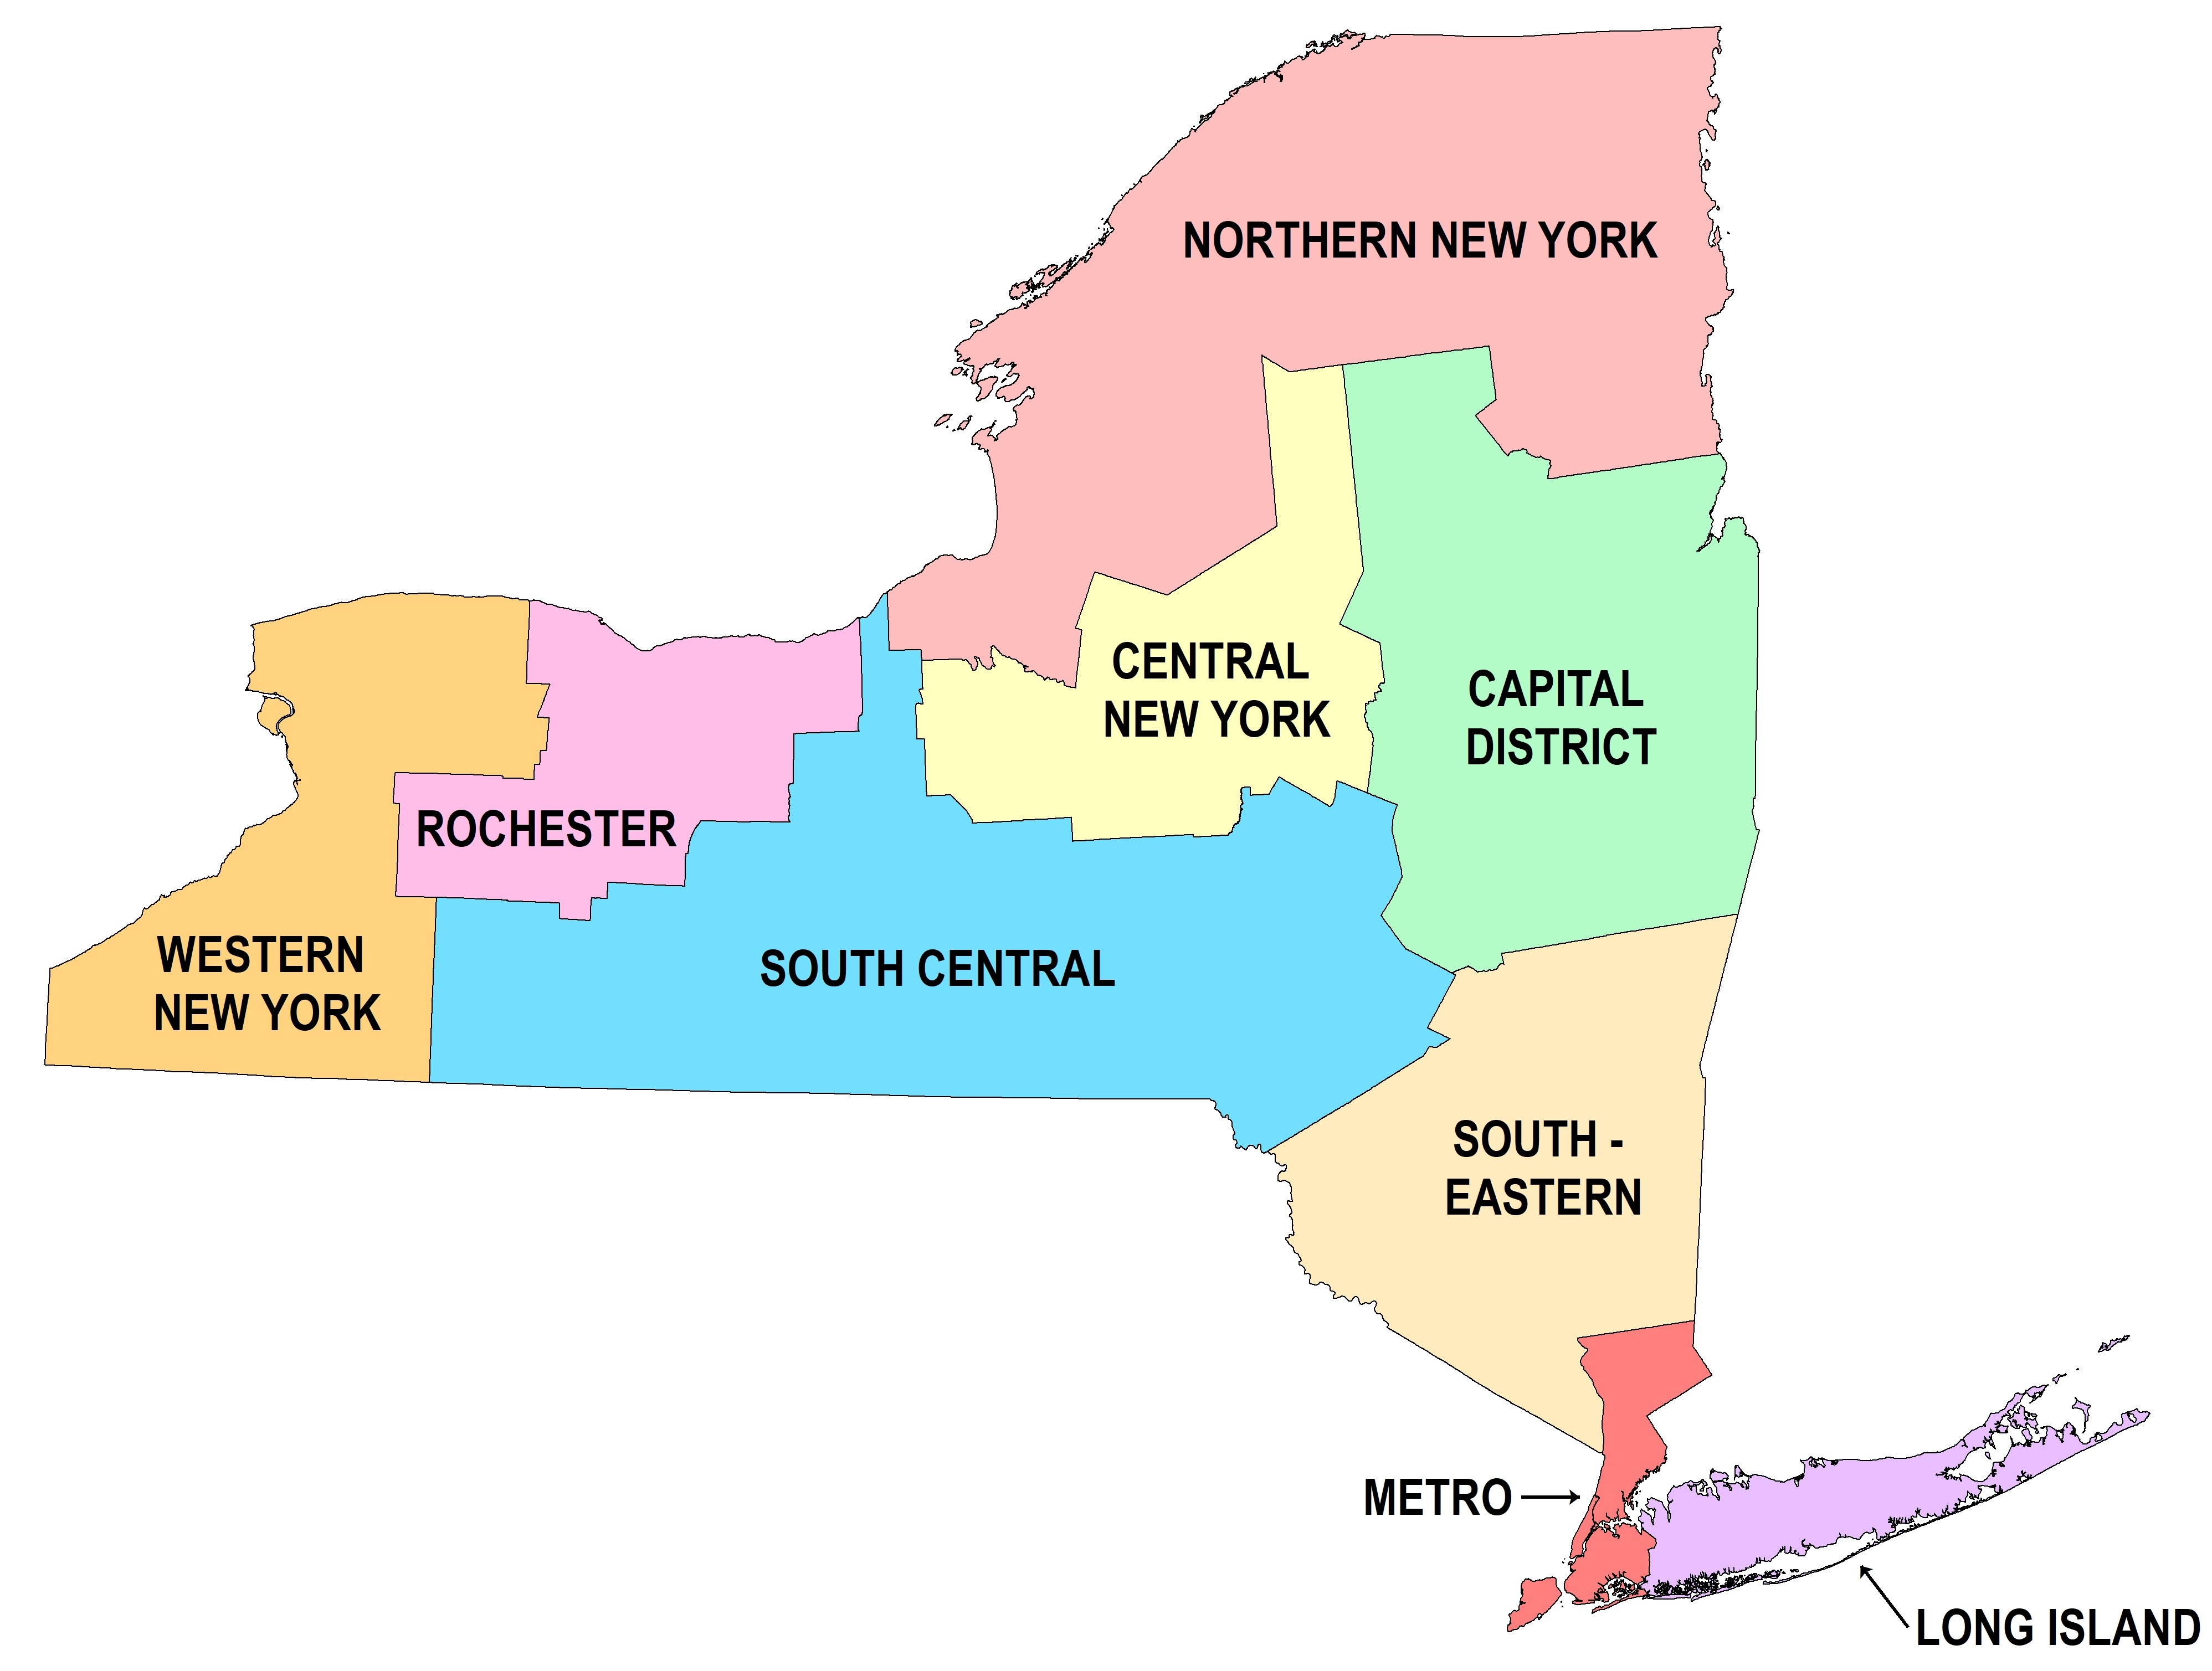 New York State's Reference and Research Library Resources Systems image map